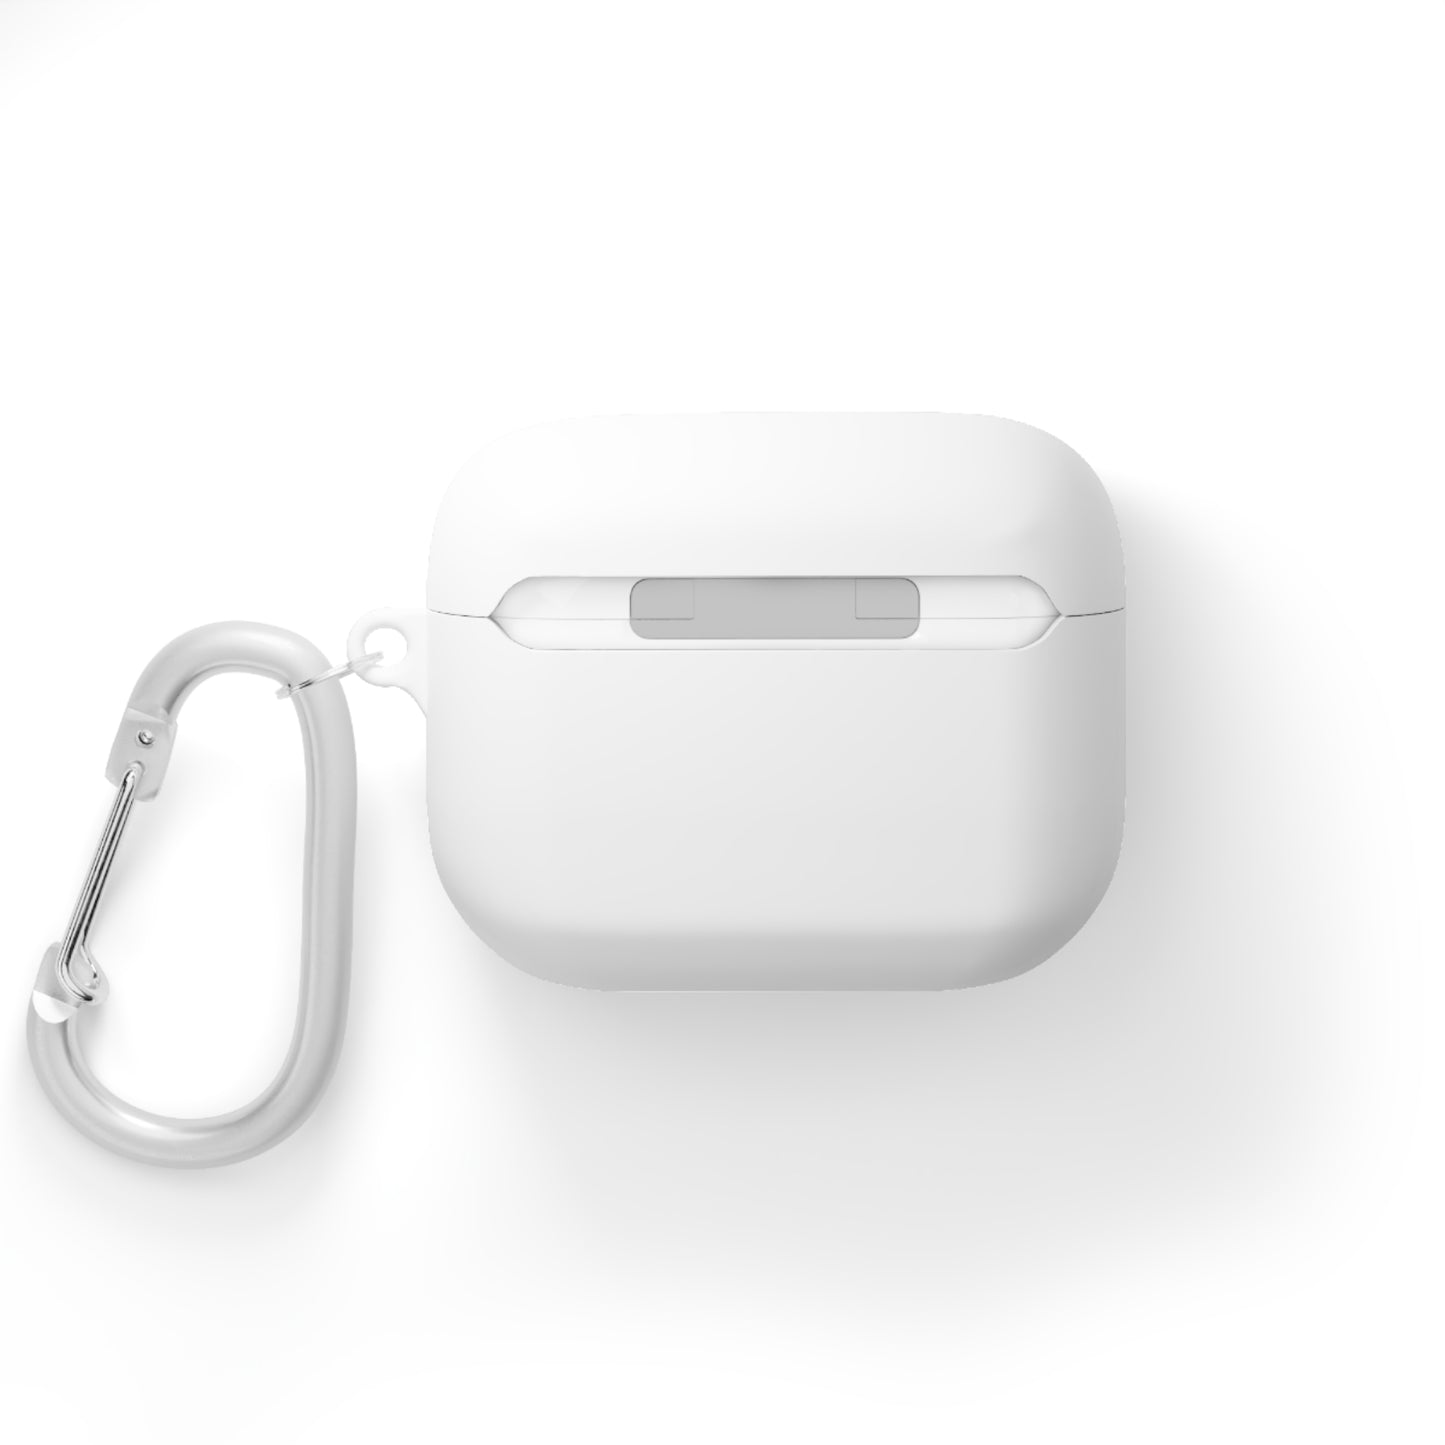 Aris Limassol AirPods and AirPods Pro Case Cover